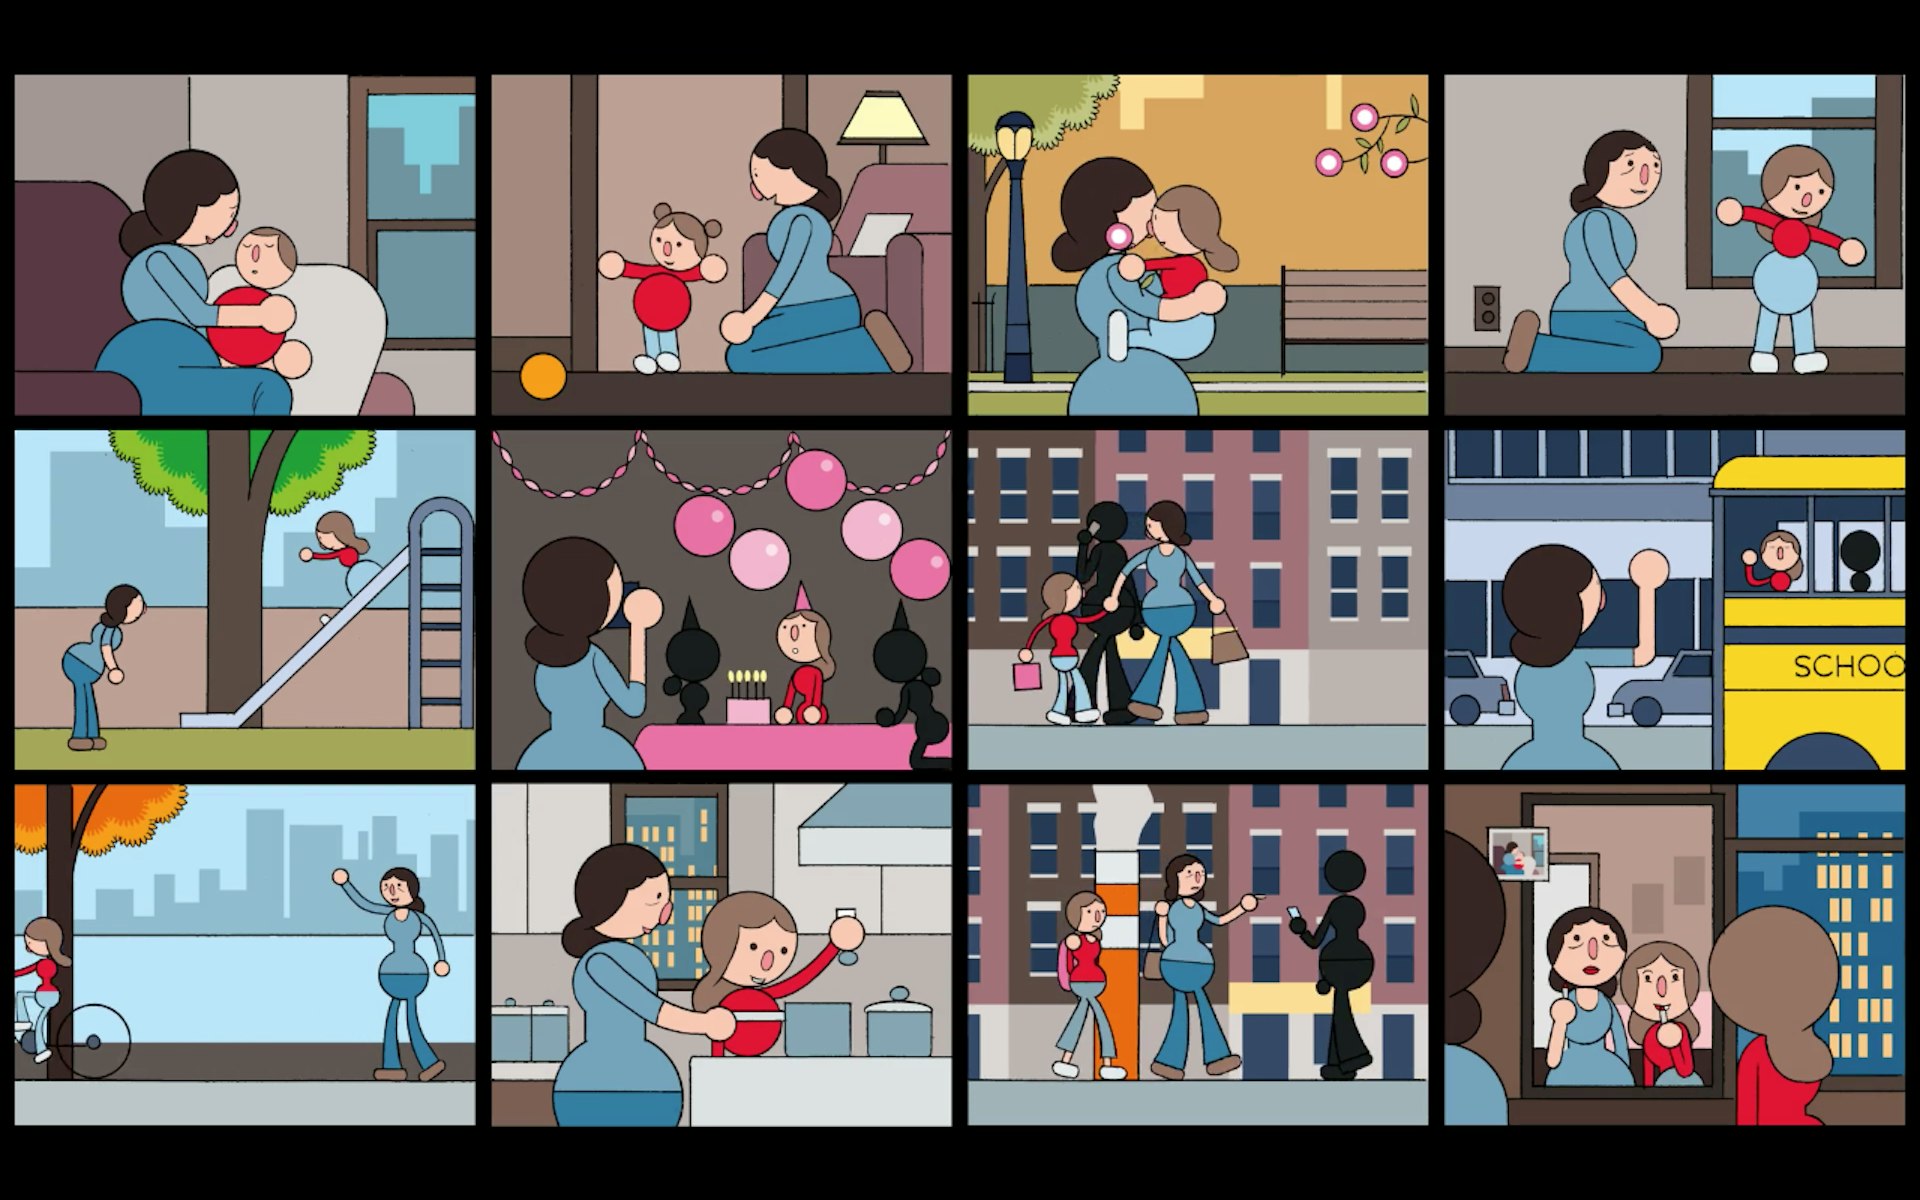 We love The New Yorker’s animated This American Life cover, featuring Ira Glass